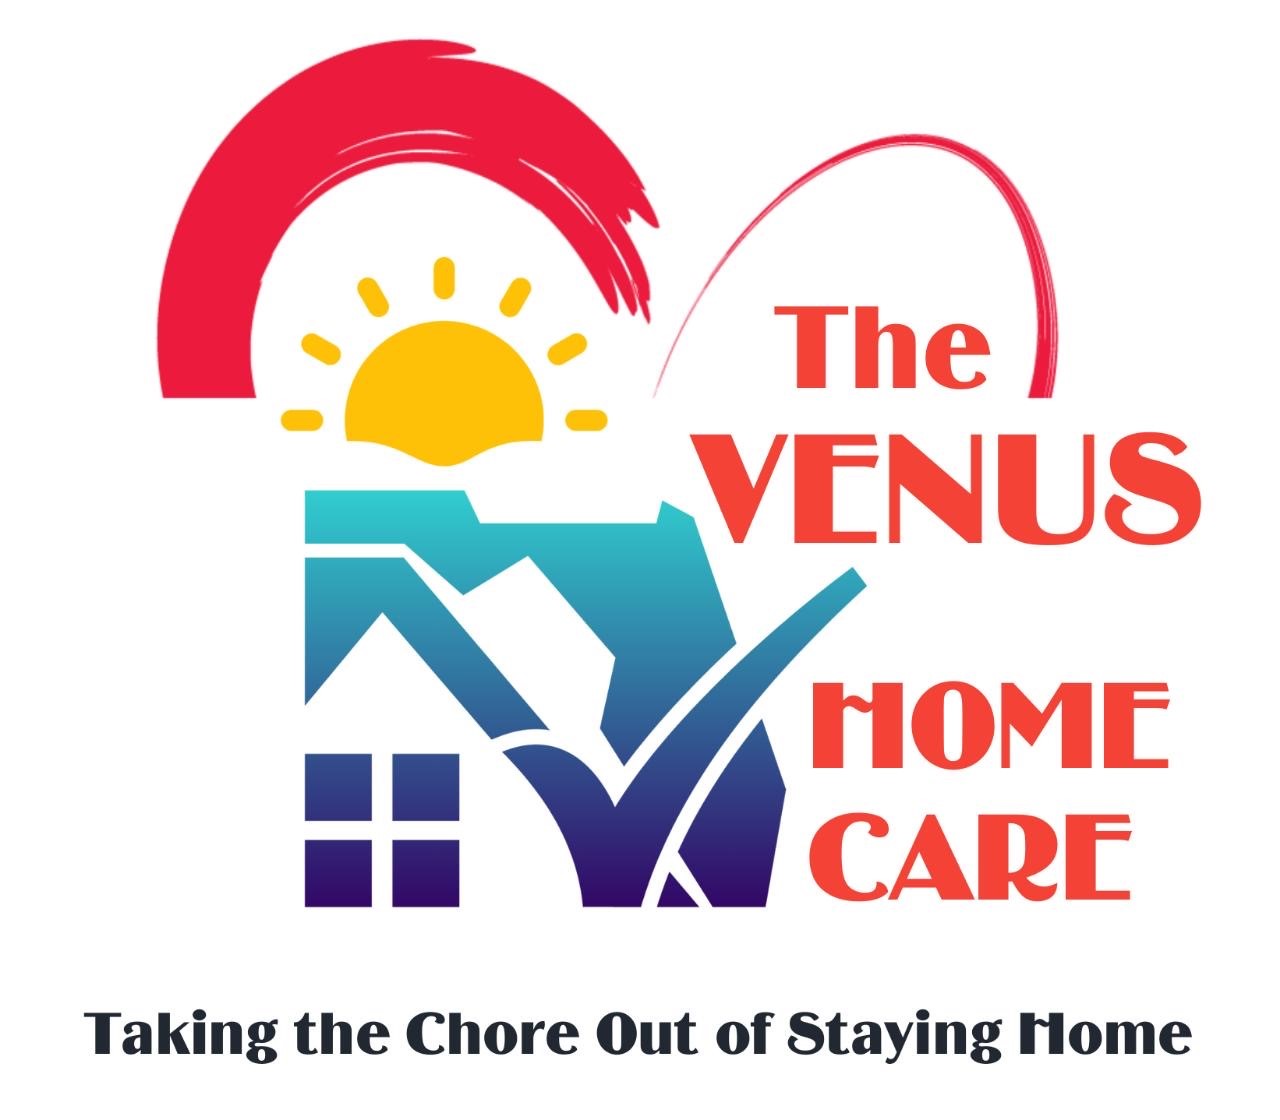 The Venus Home Care-Indiana, LLC at South Bend, IN